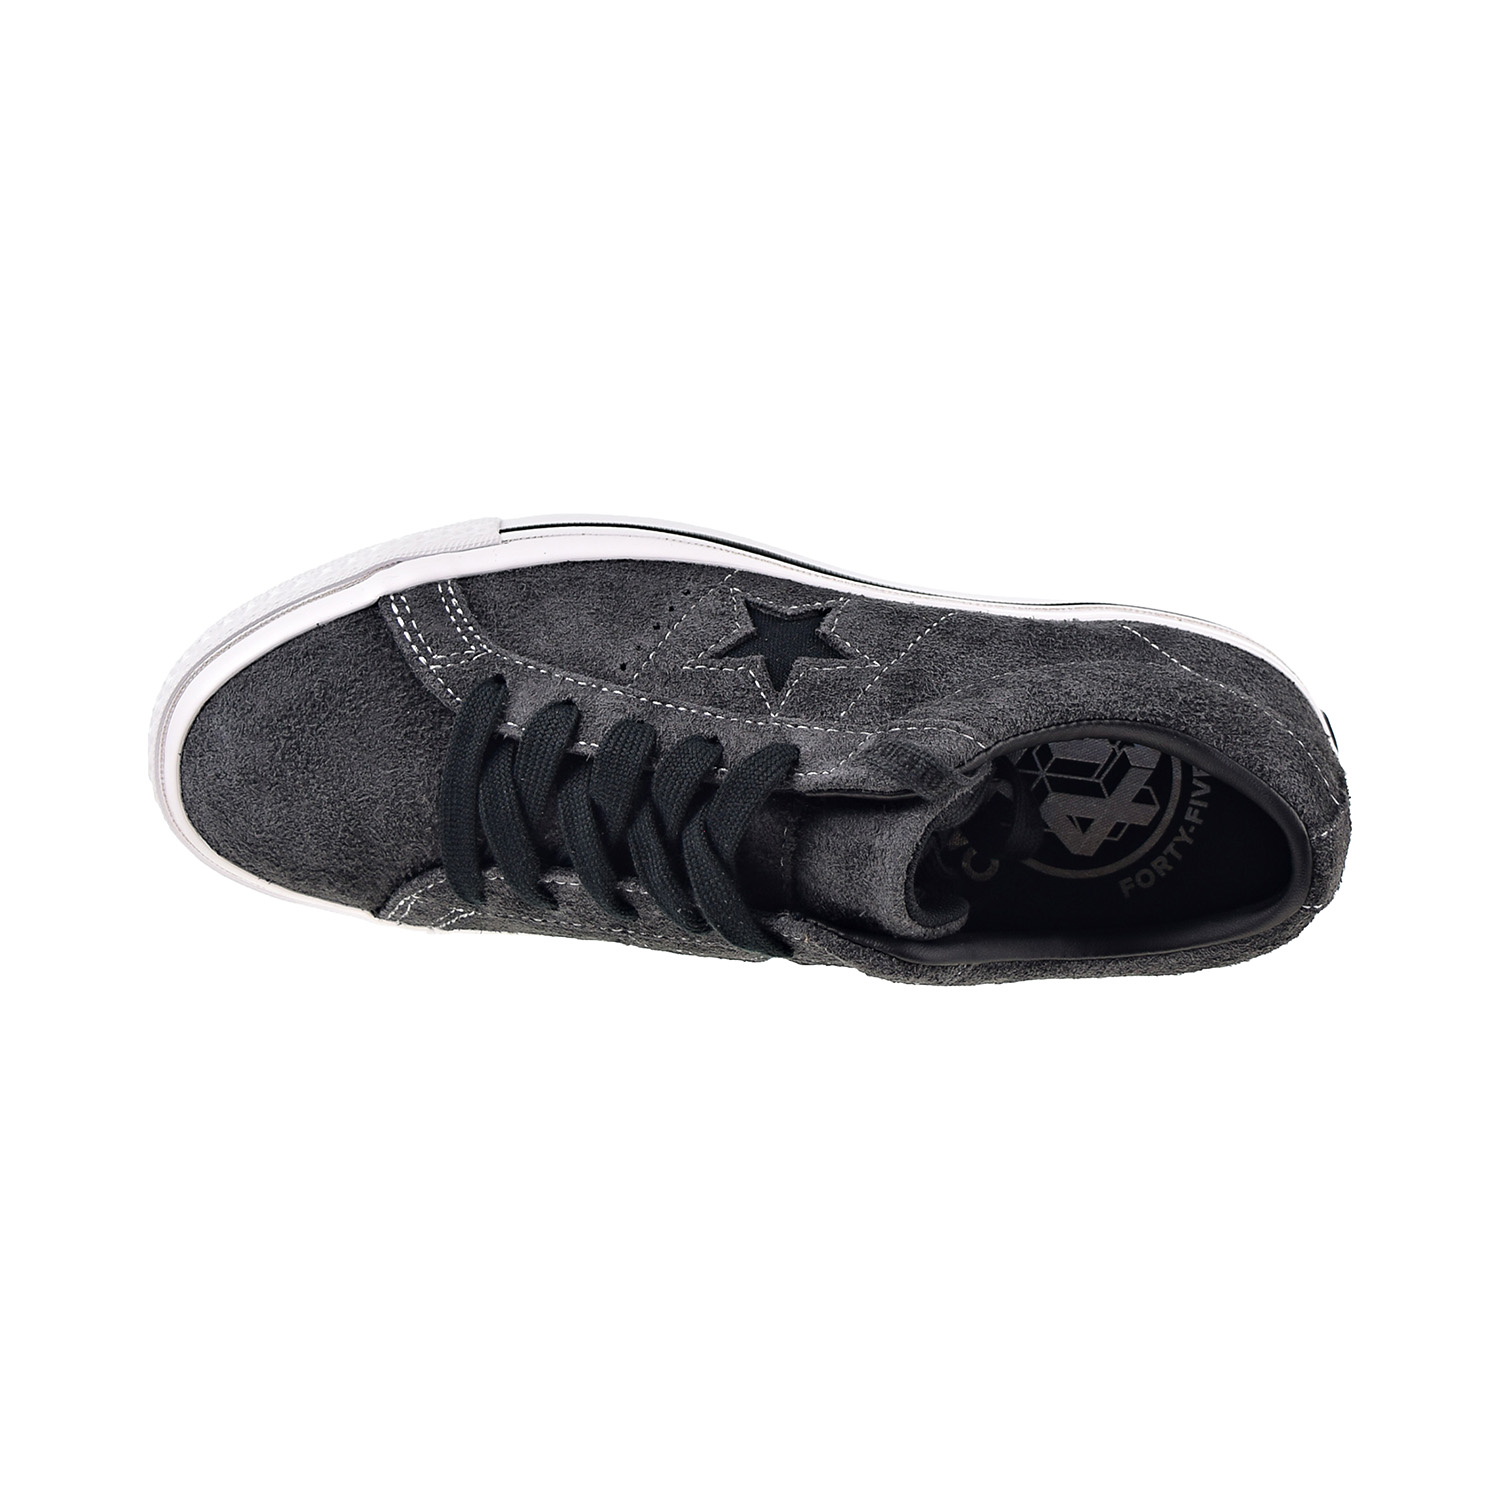 Converse One Star Ox Men's Shoes Almost Black-Black-White 163247c - image 5 of 6